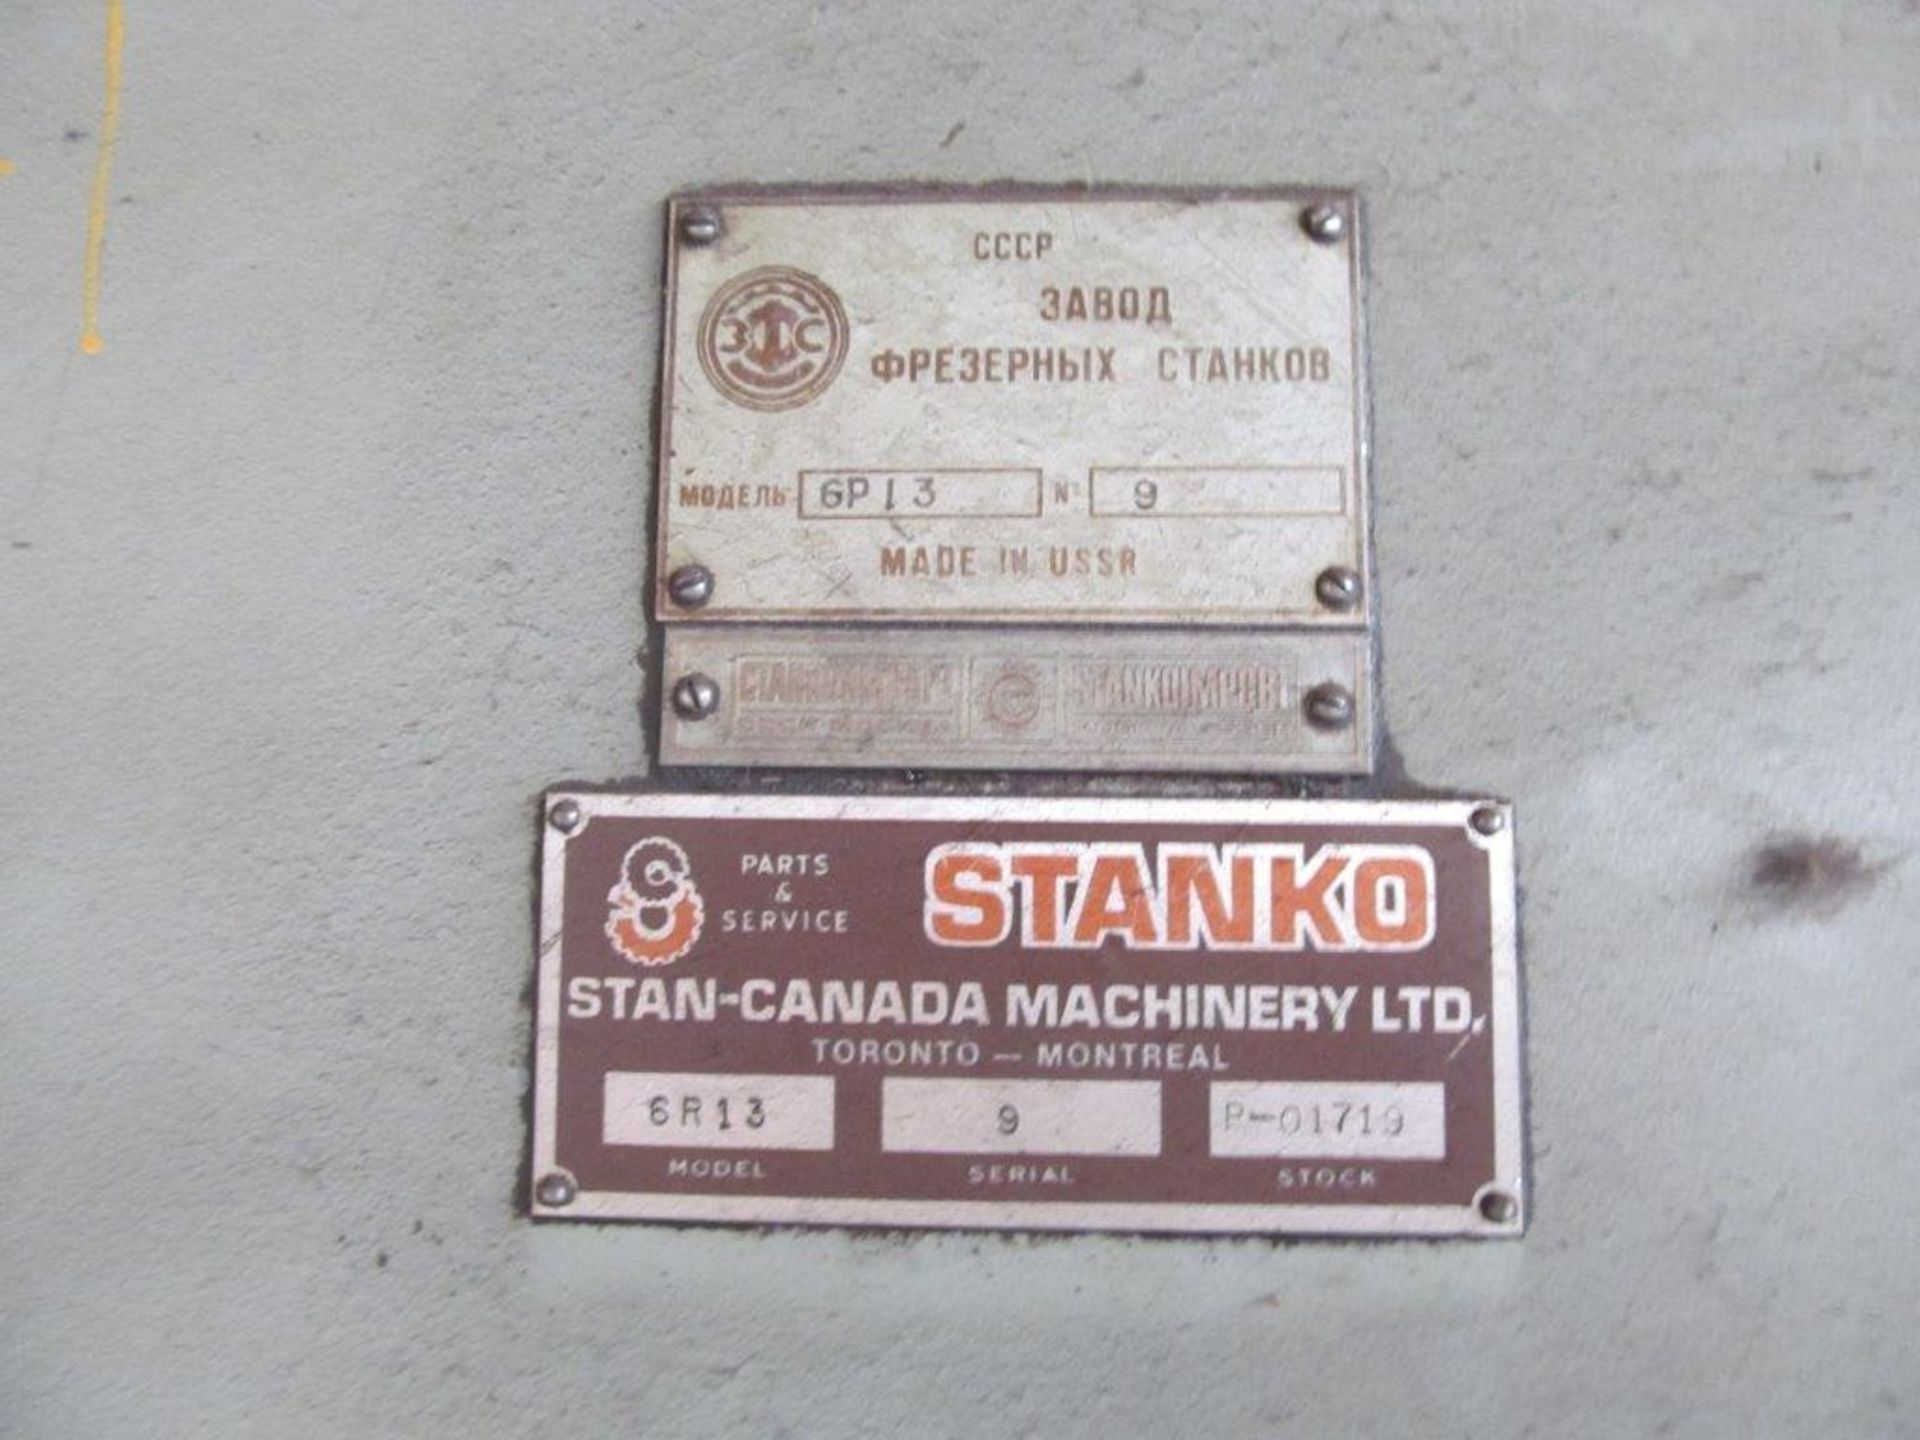 STANKO VERTICAL MILL MODEL 6R13, 16” x 67” T-SLOT TABLE, 1600 RPM, SN 9 - Image 4 of 4